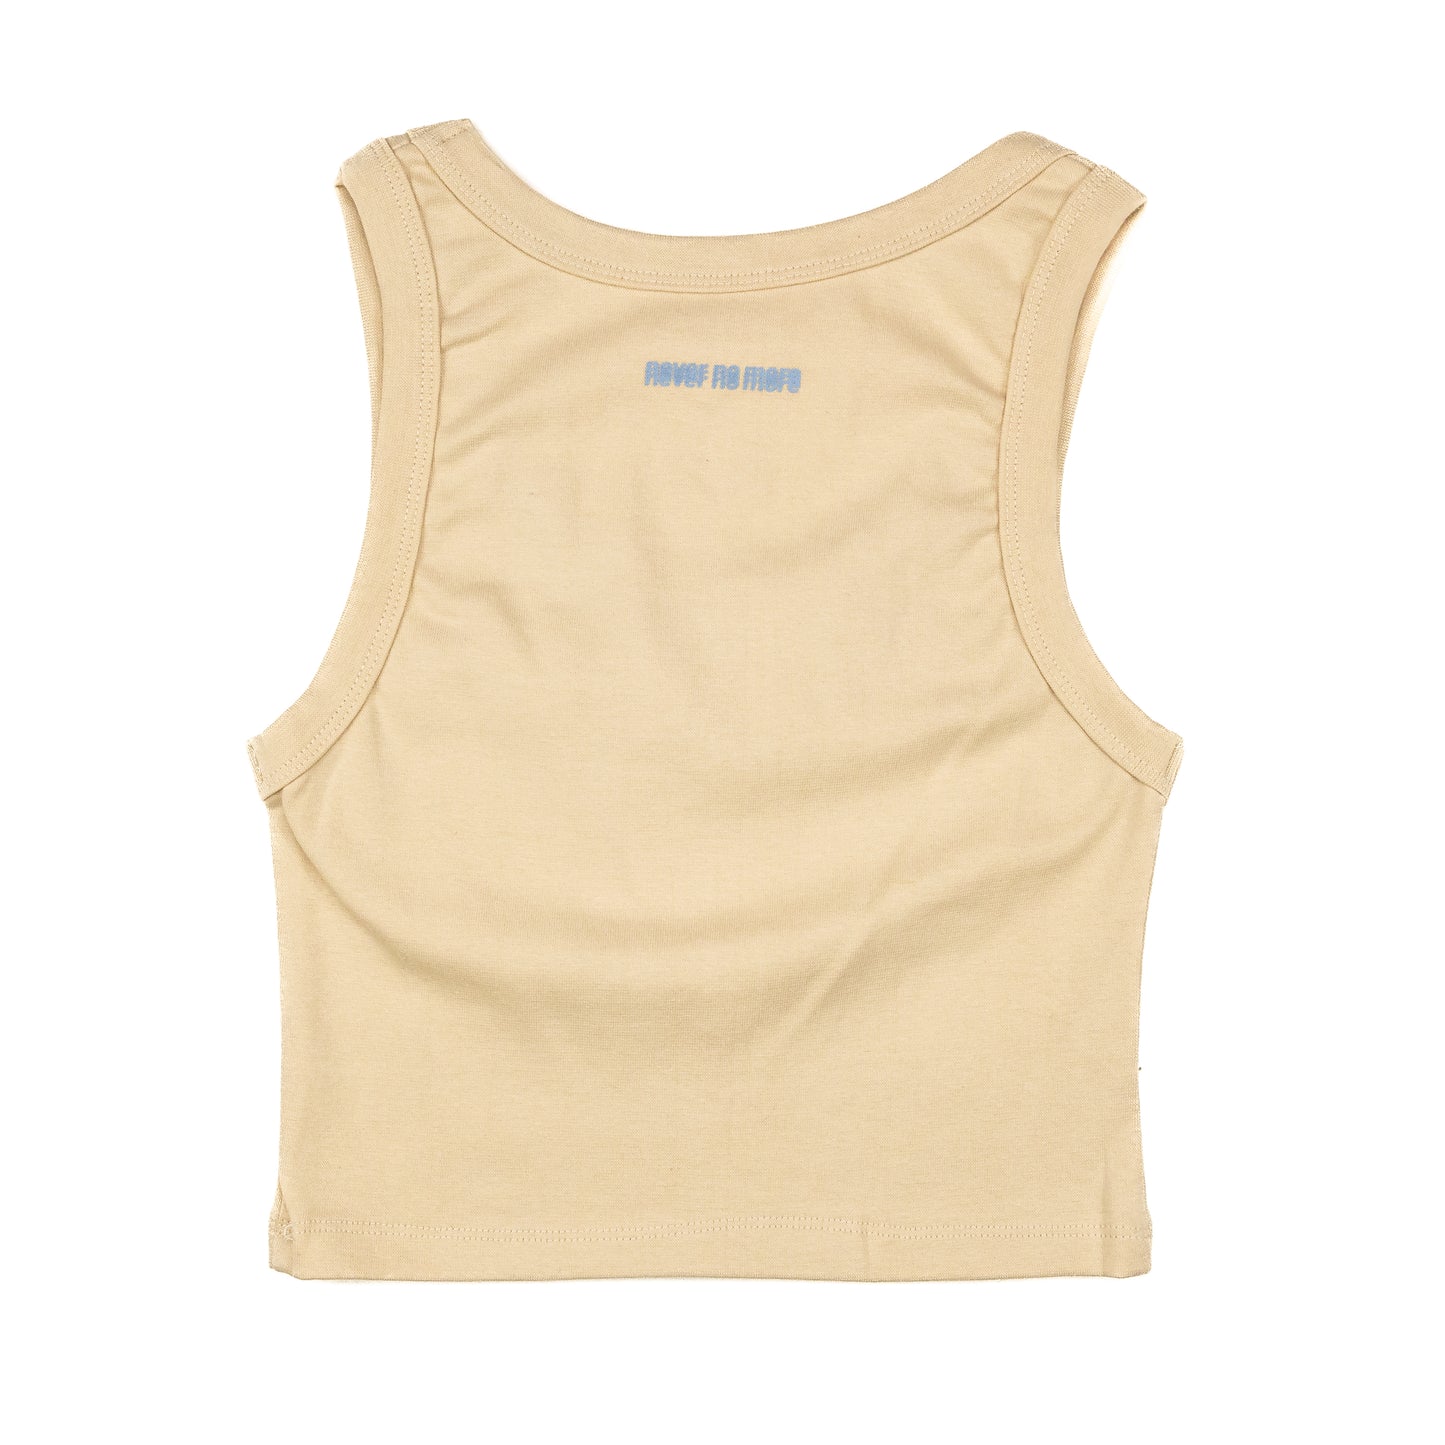 Womens Flying Duck Tank, Tan - Layr Official